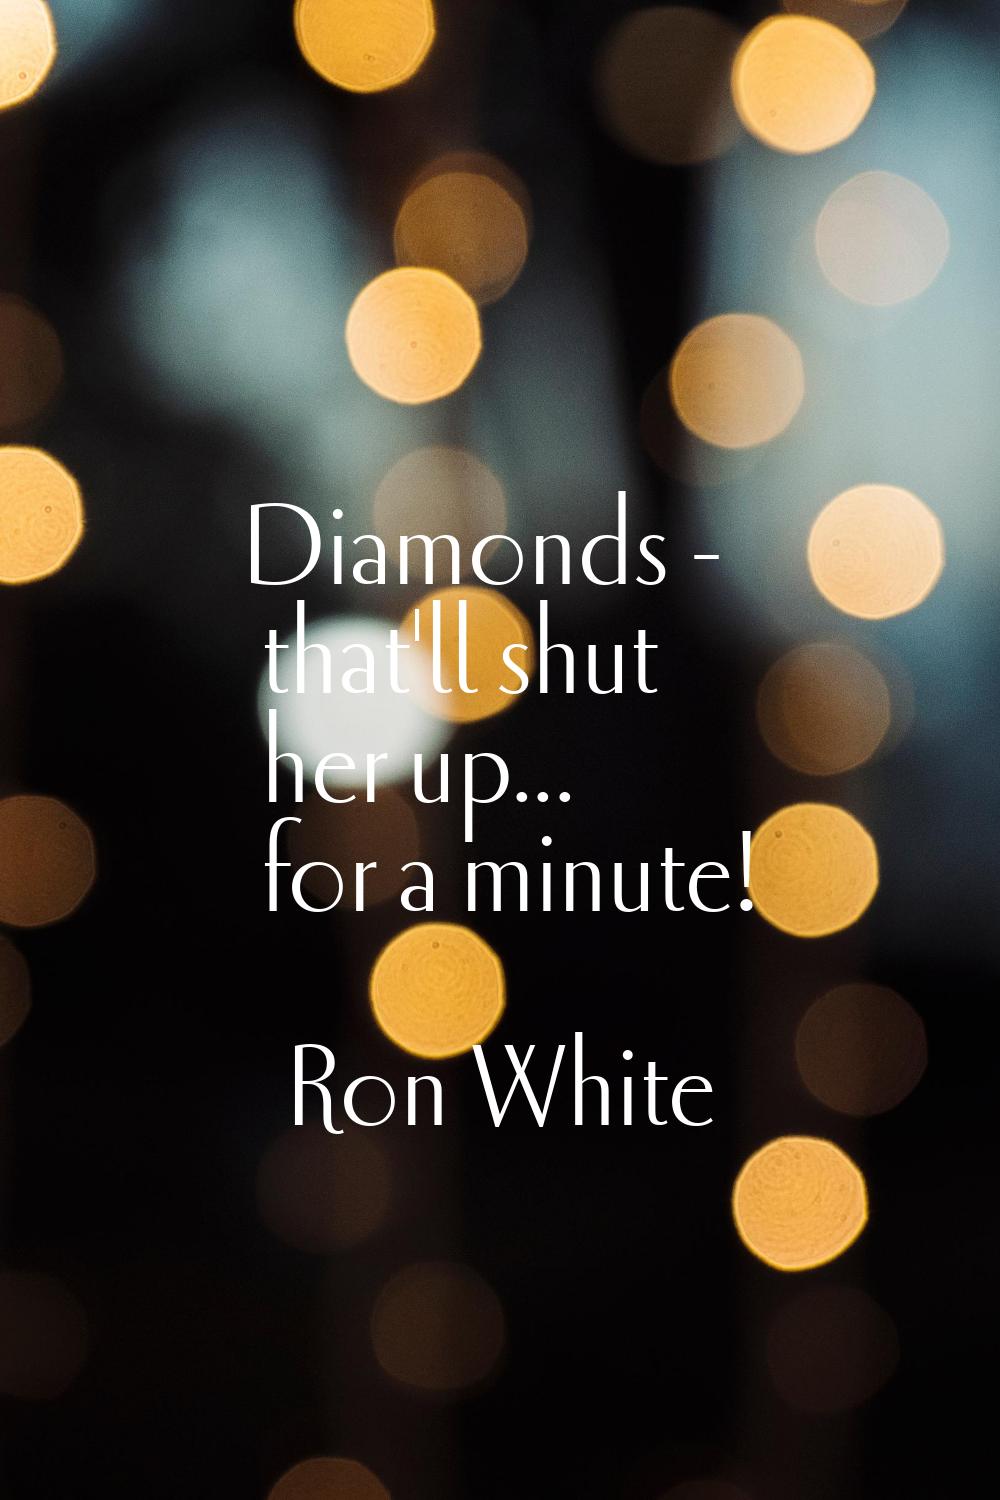 Diamonds - that'll shut her up... for a minute!